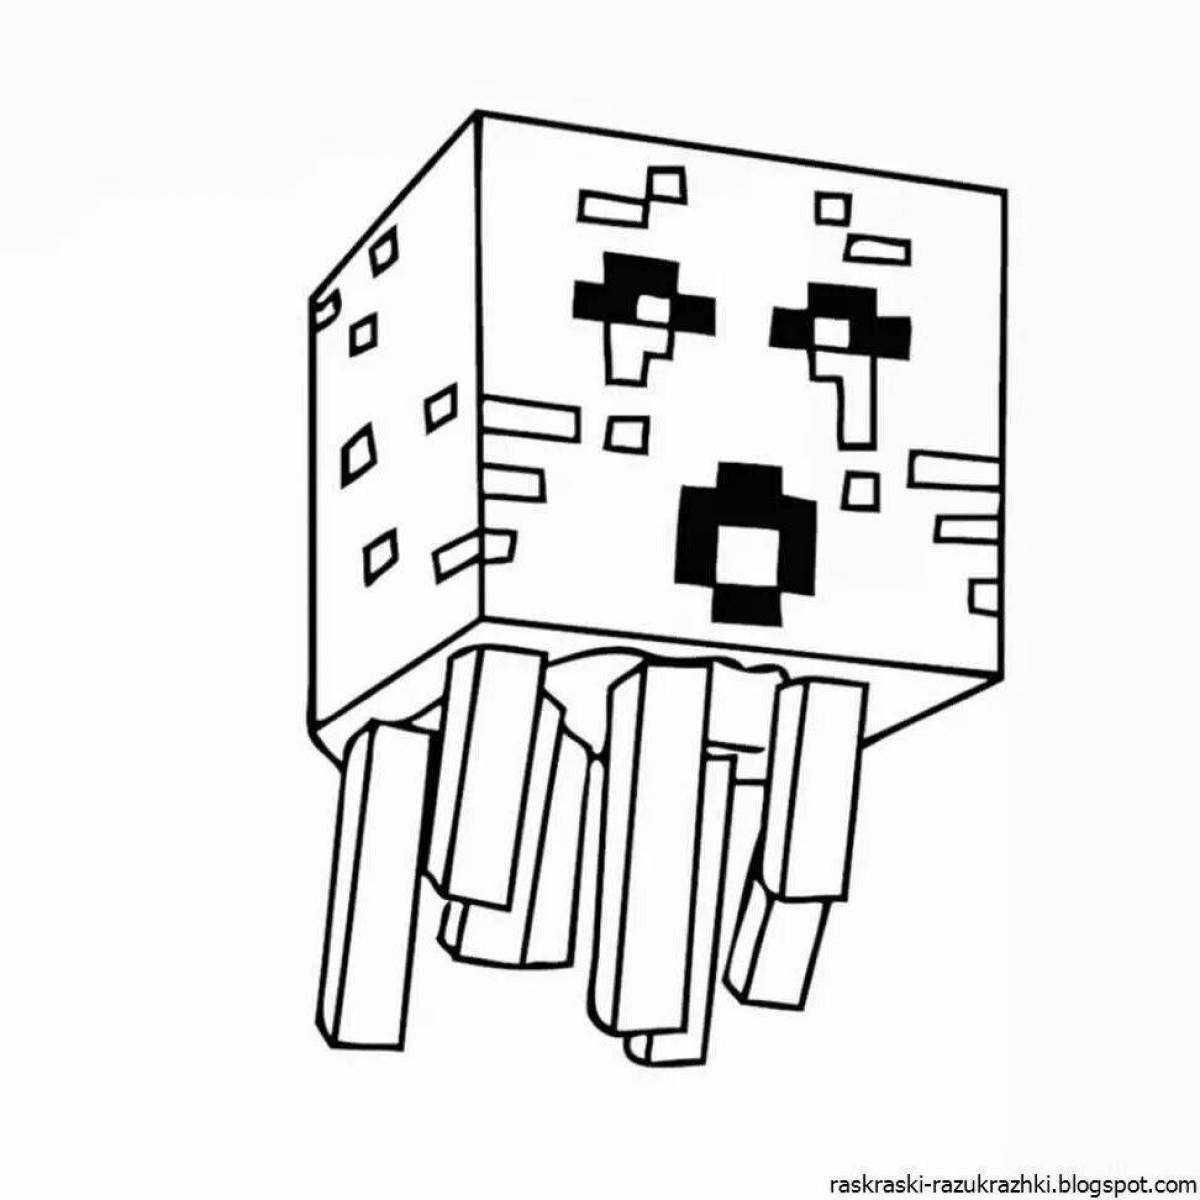 Super coloring for minecraft fans